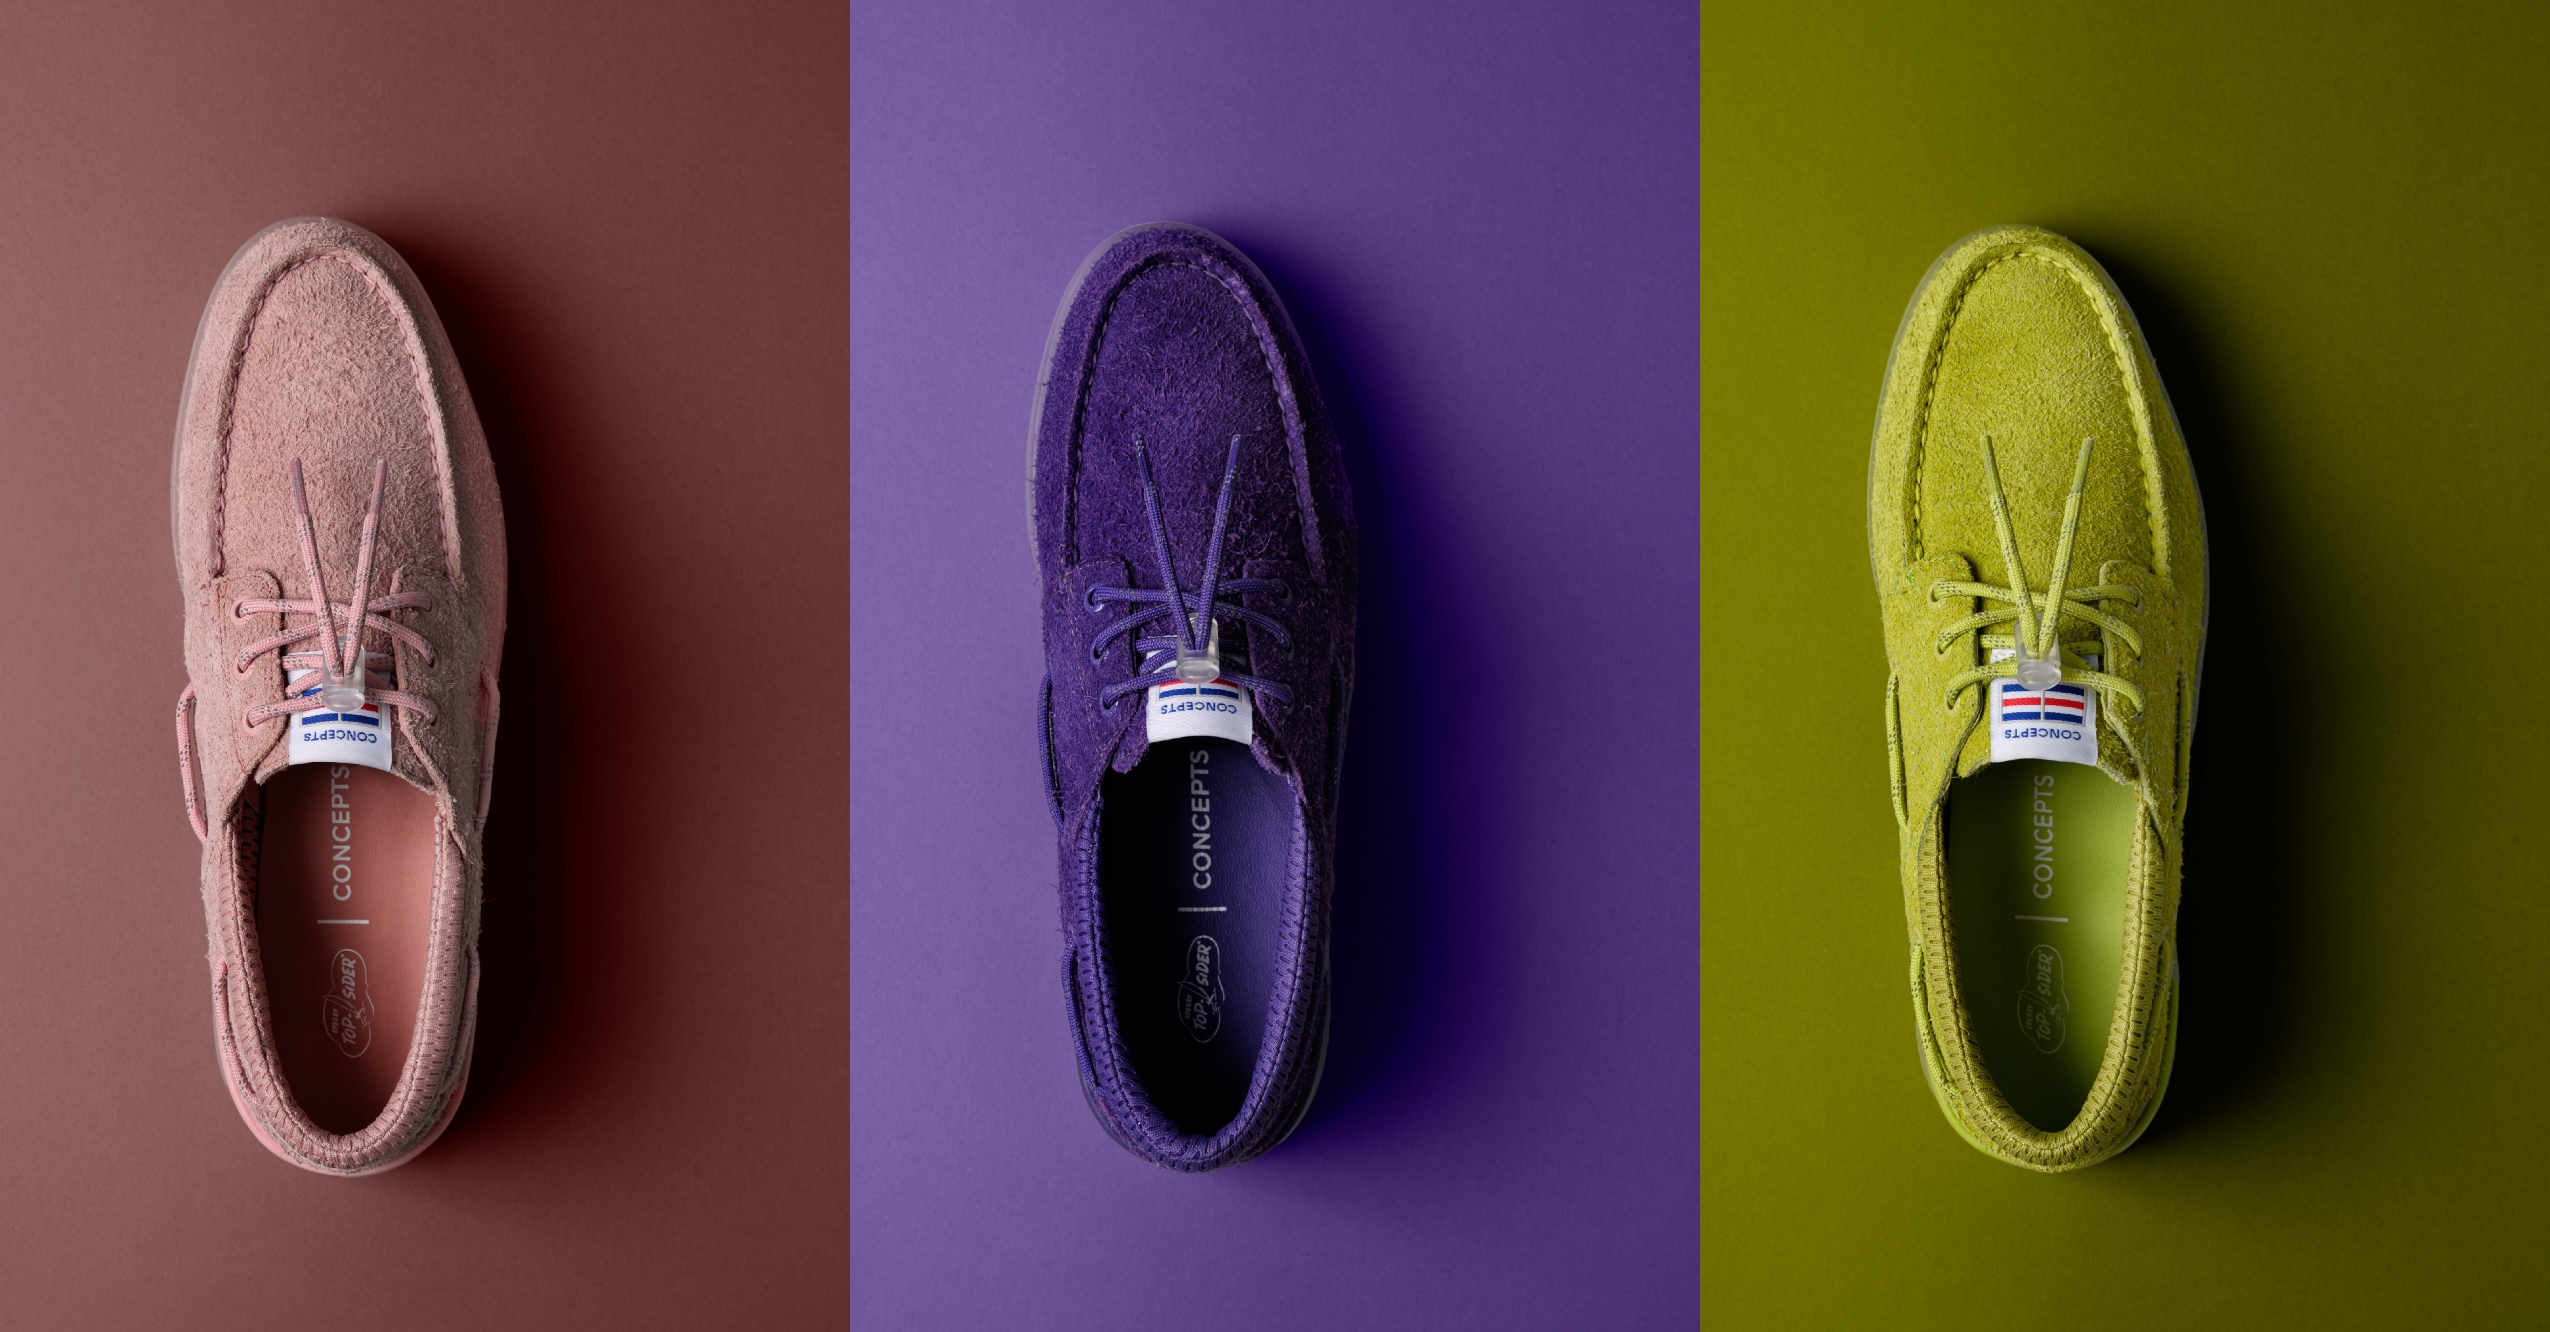 Sperry Launches Colorful Boat Shoe Collection With Streetwear Brand CNCPTS